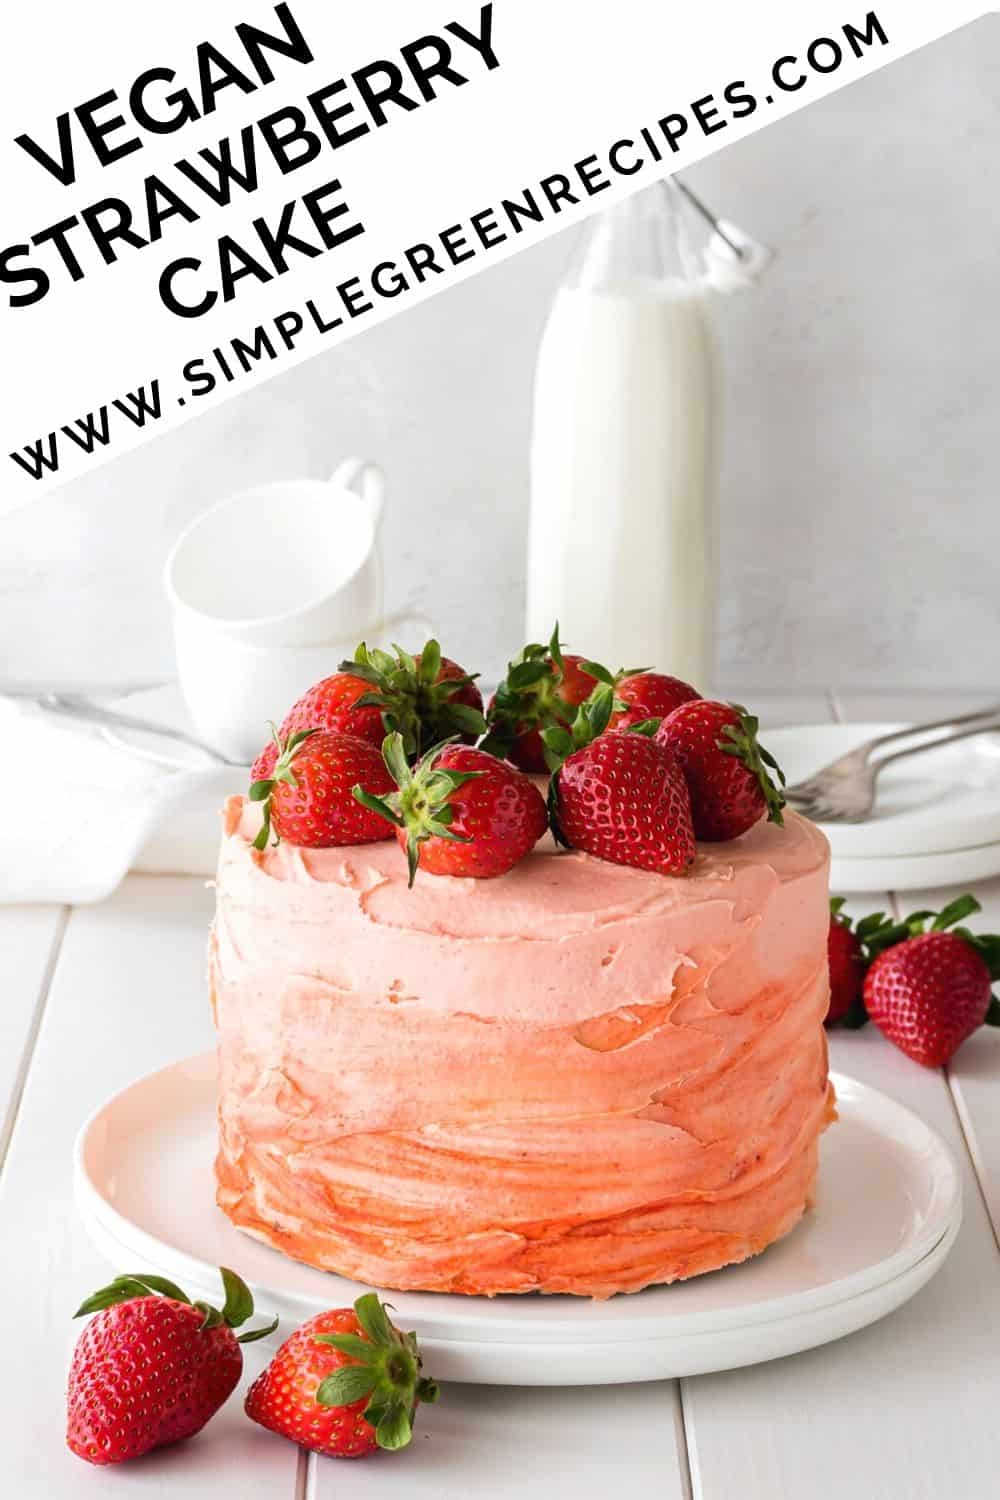 Strawberry cake on a white plate, topped with fresh strawberries, in front of a milk bottle.